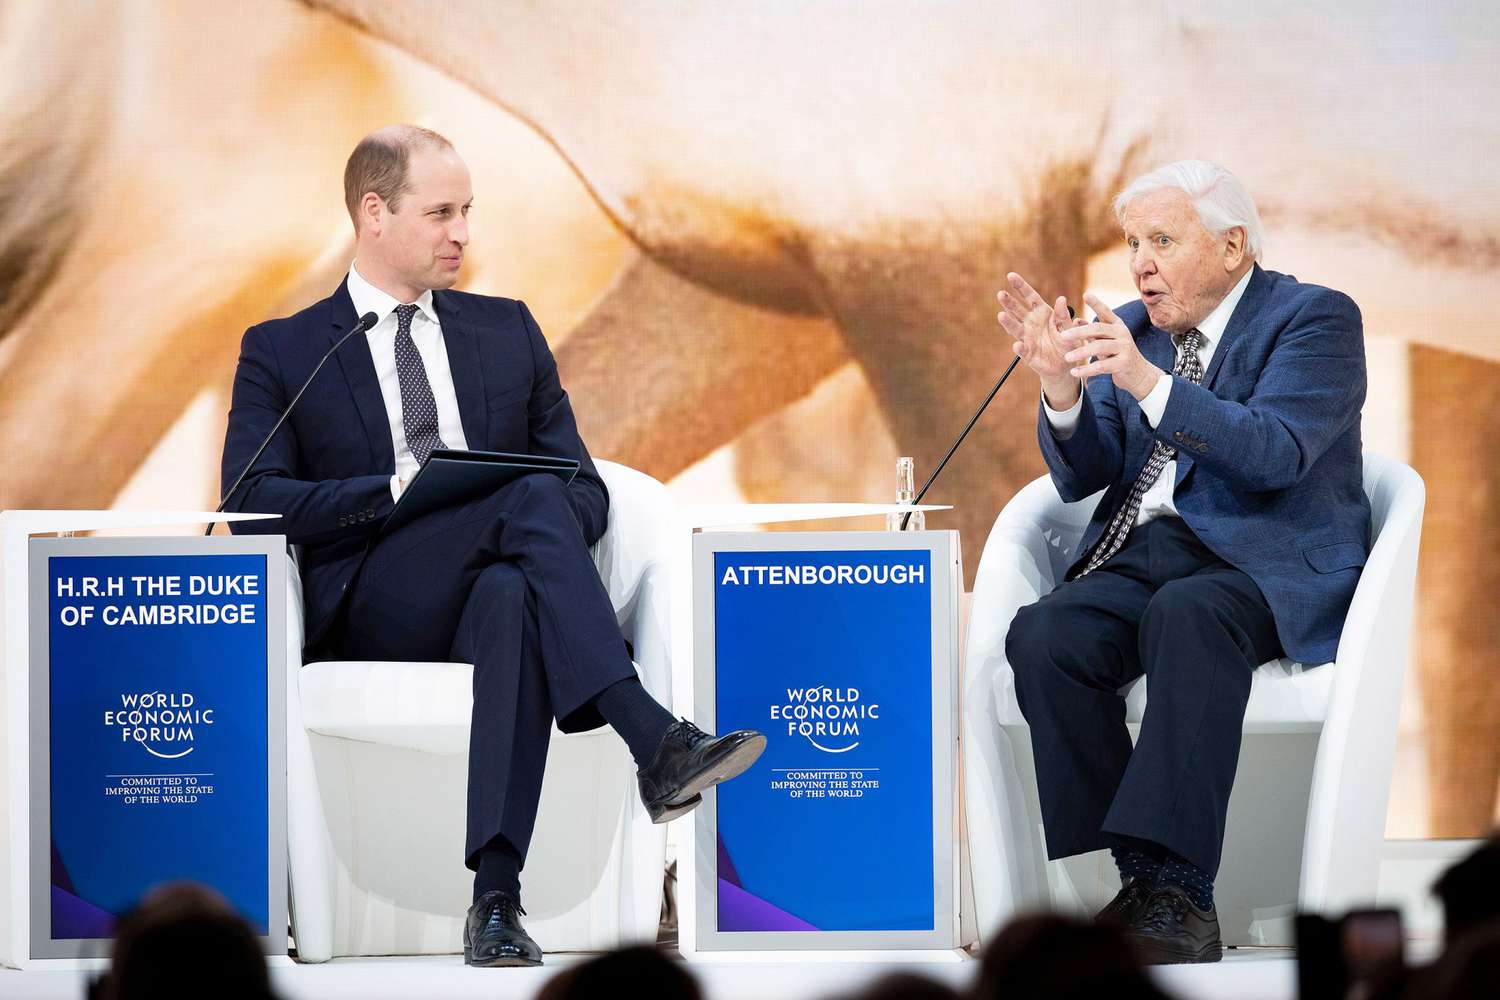 49th Annual Meeting of the World Economic Forum, WEF, in Davos, Switzerland - 22 Jan 2019